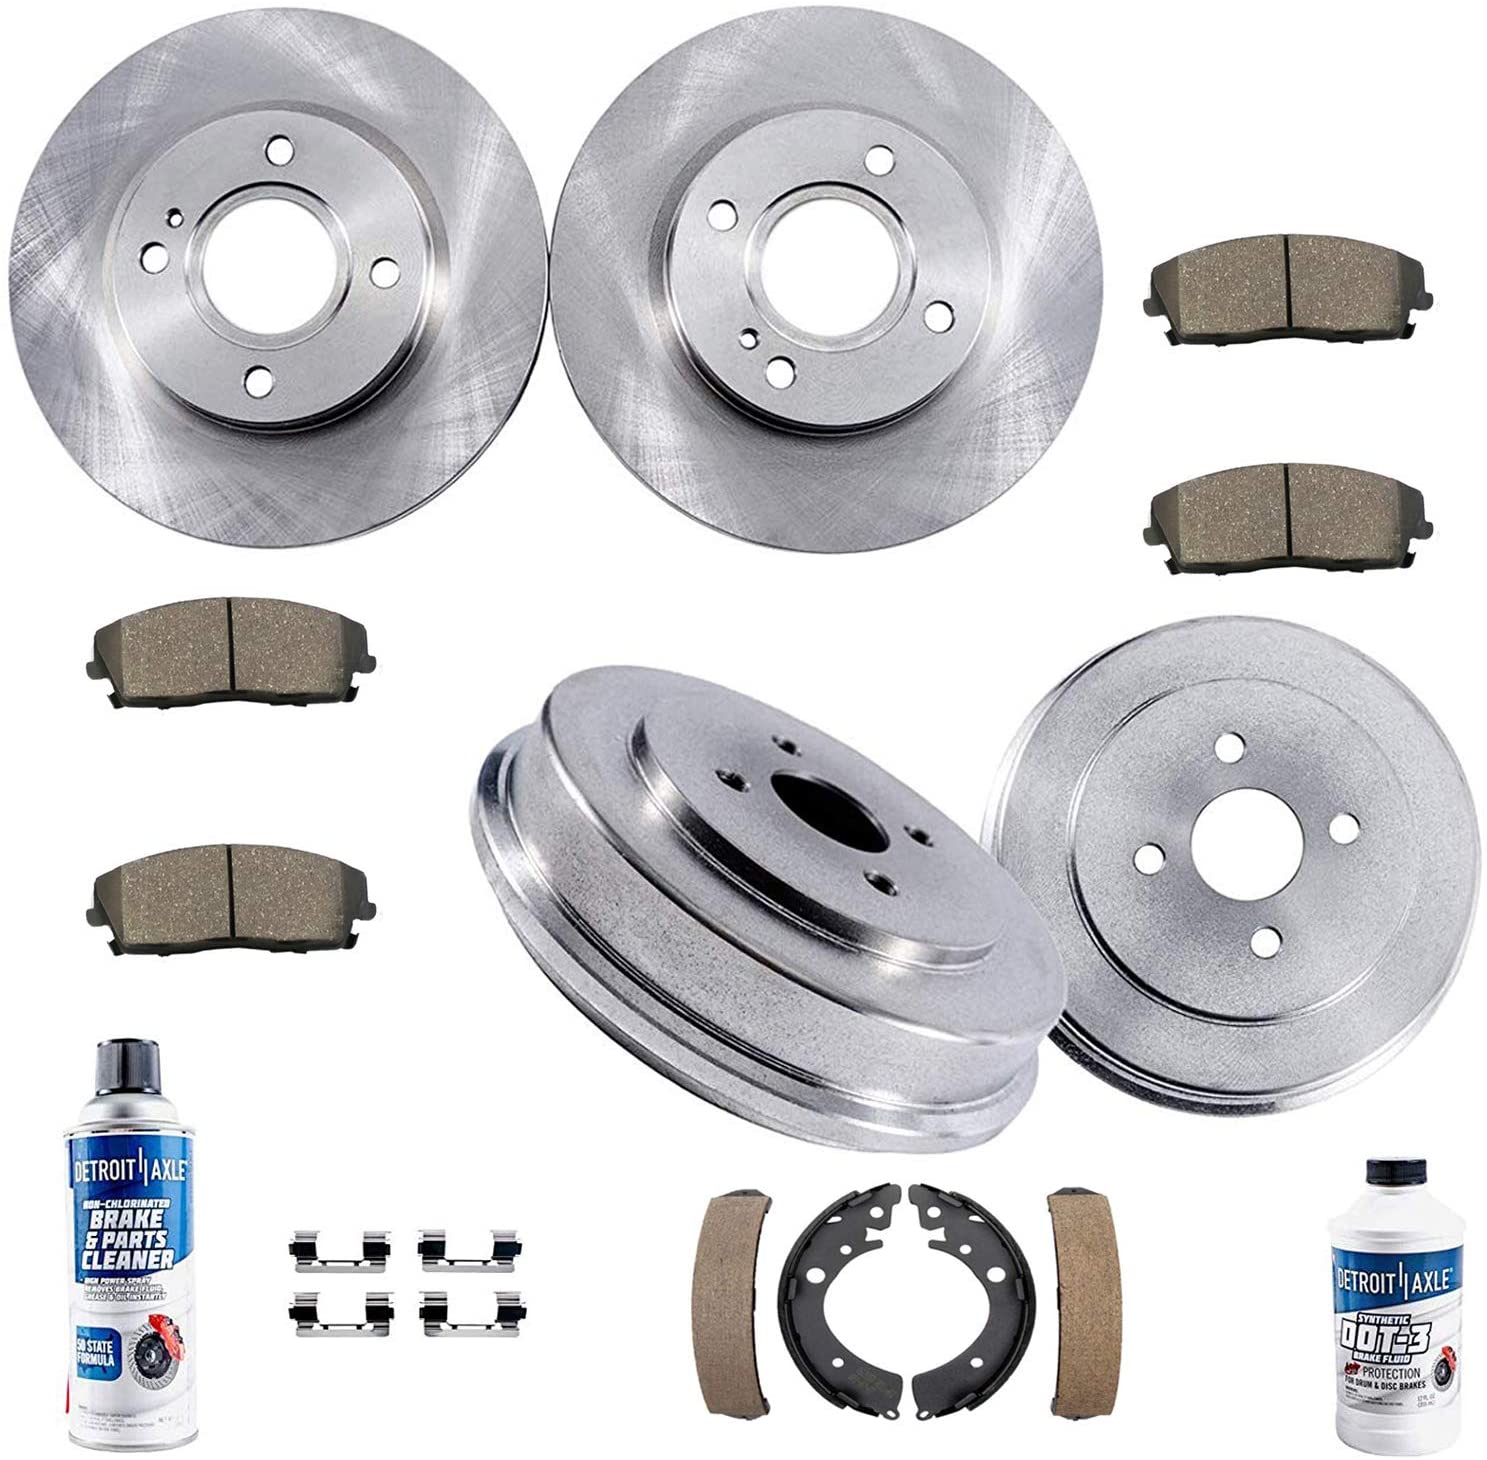 Detroit Axle - All (4) Front Brake Kit Rotors and Rear Brake Kit Drums w/Ceramic Pads and Shoes w/Hardware & Brake Kit Cleaner Fluid for 2001 2002 2003 2004 2005 Honda Civic L4 1.7L